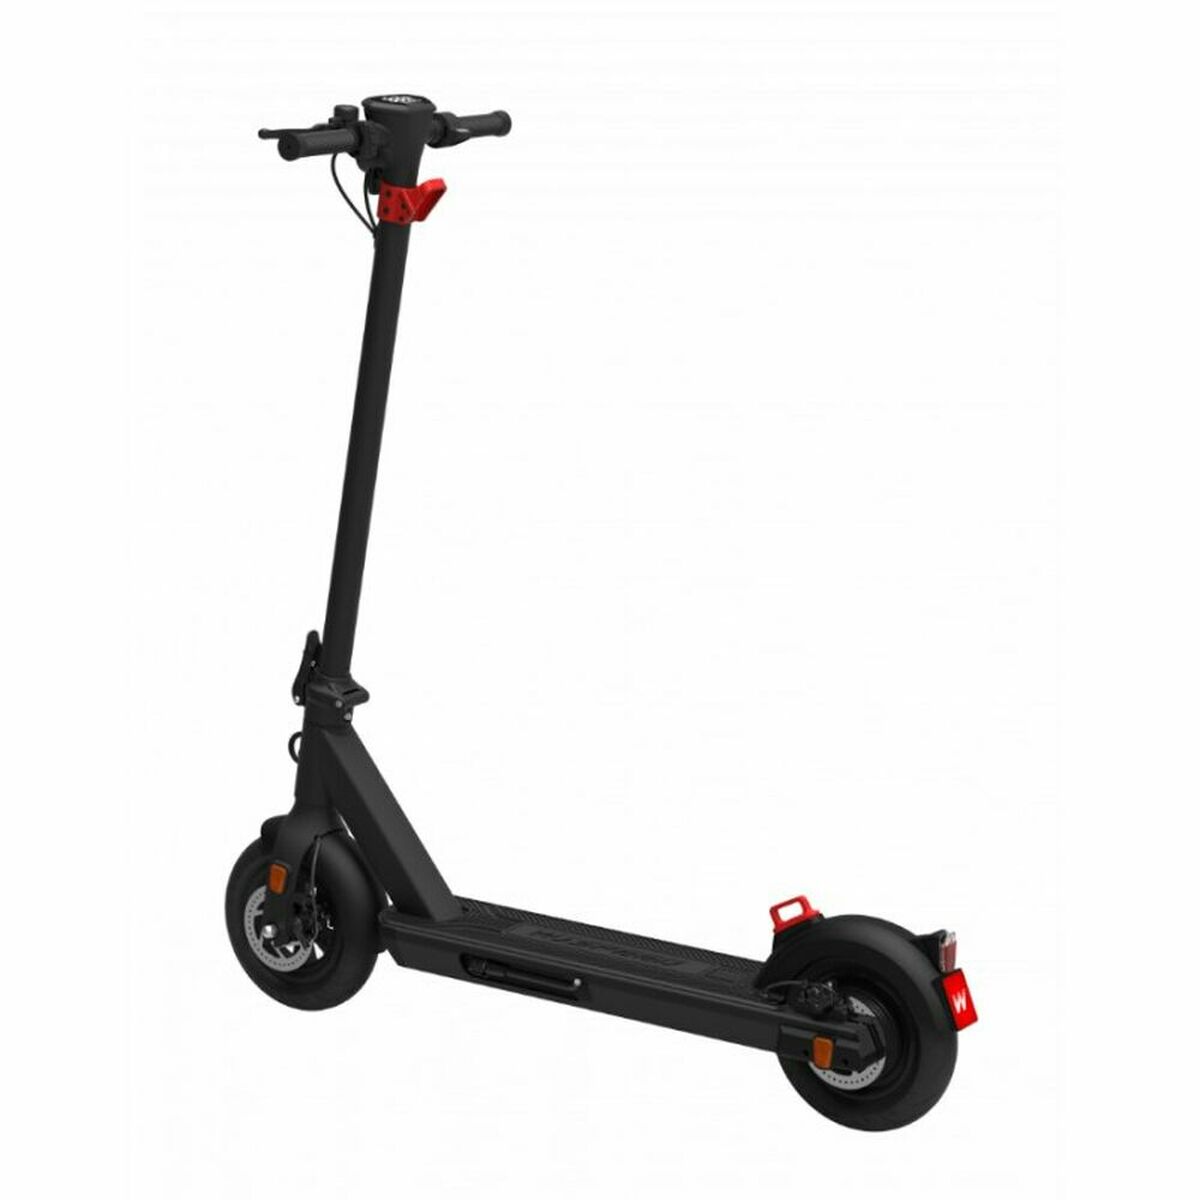 Electric Scooter Logicom SUV1000 Black 10" 320 W IPX6 36 V, Logicom, Sports and outdoors, Urban mobility, electric-scooter-logicom-suv1000-black-10-320-w-ipx6-36-v, Brand_Logicom, category-reference-2609, category-reference-2629, category-reference-2904, category-reference-t-19681, category-reference-t-19756, category-reference-t-19876, category-reference-t-21245, Condition_NEW, deportista / en forma, Price_600 - 700, RiotNook